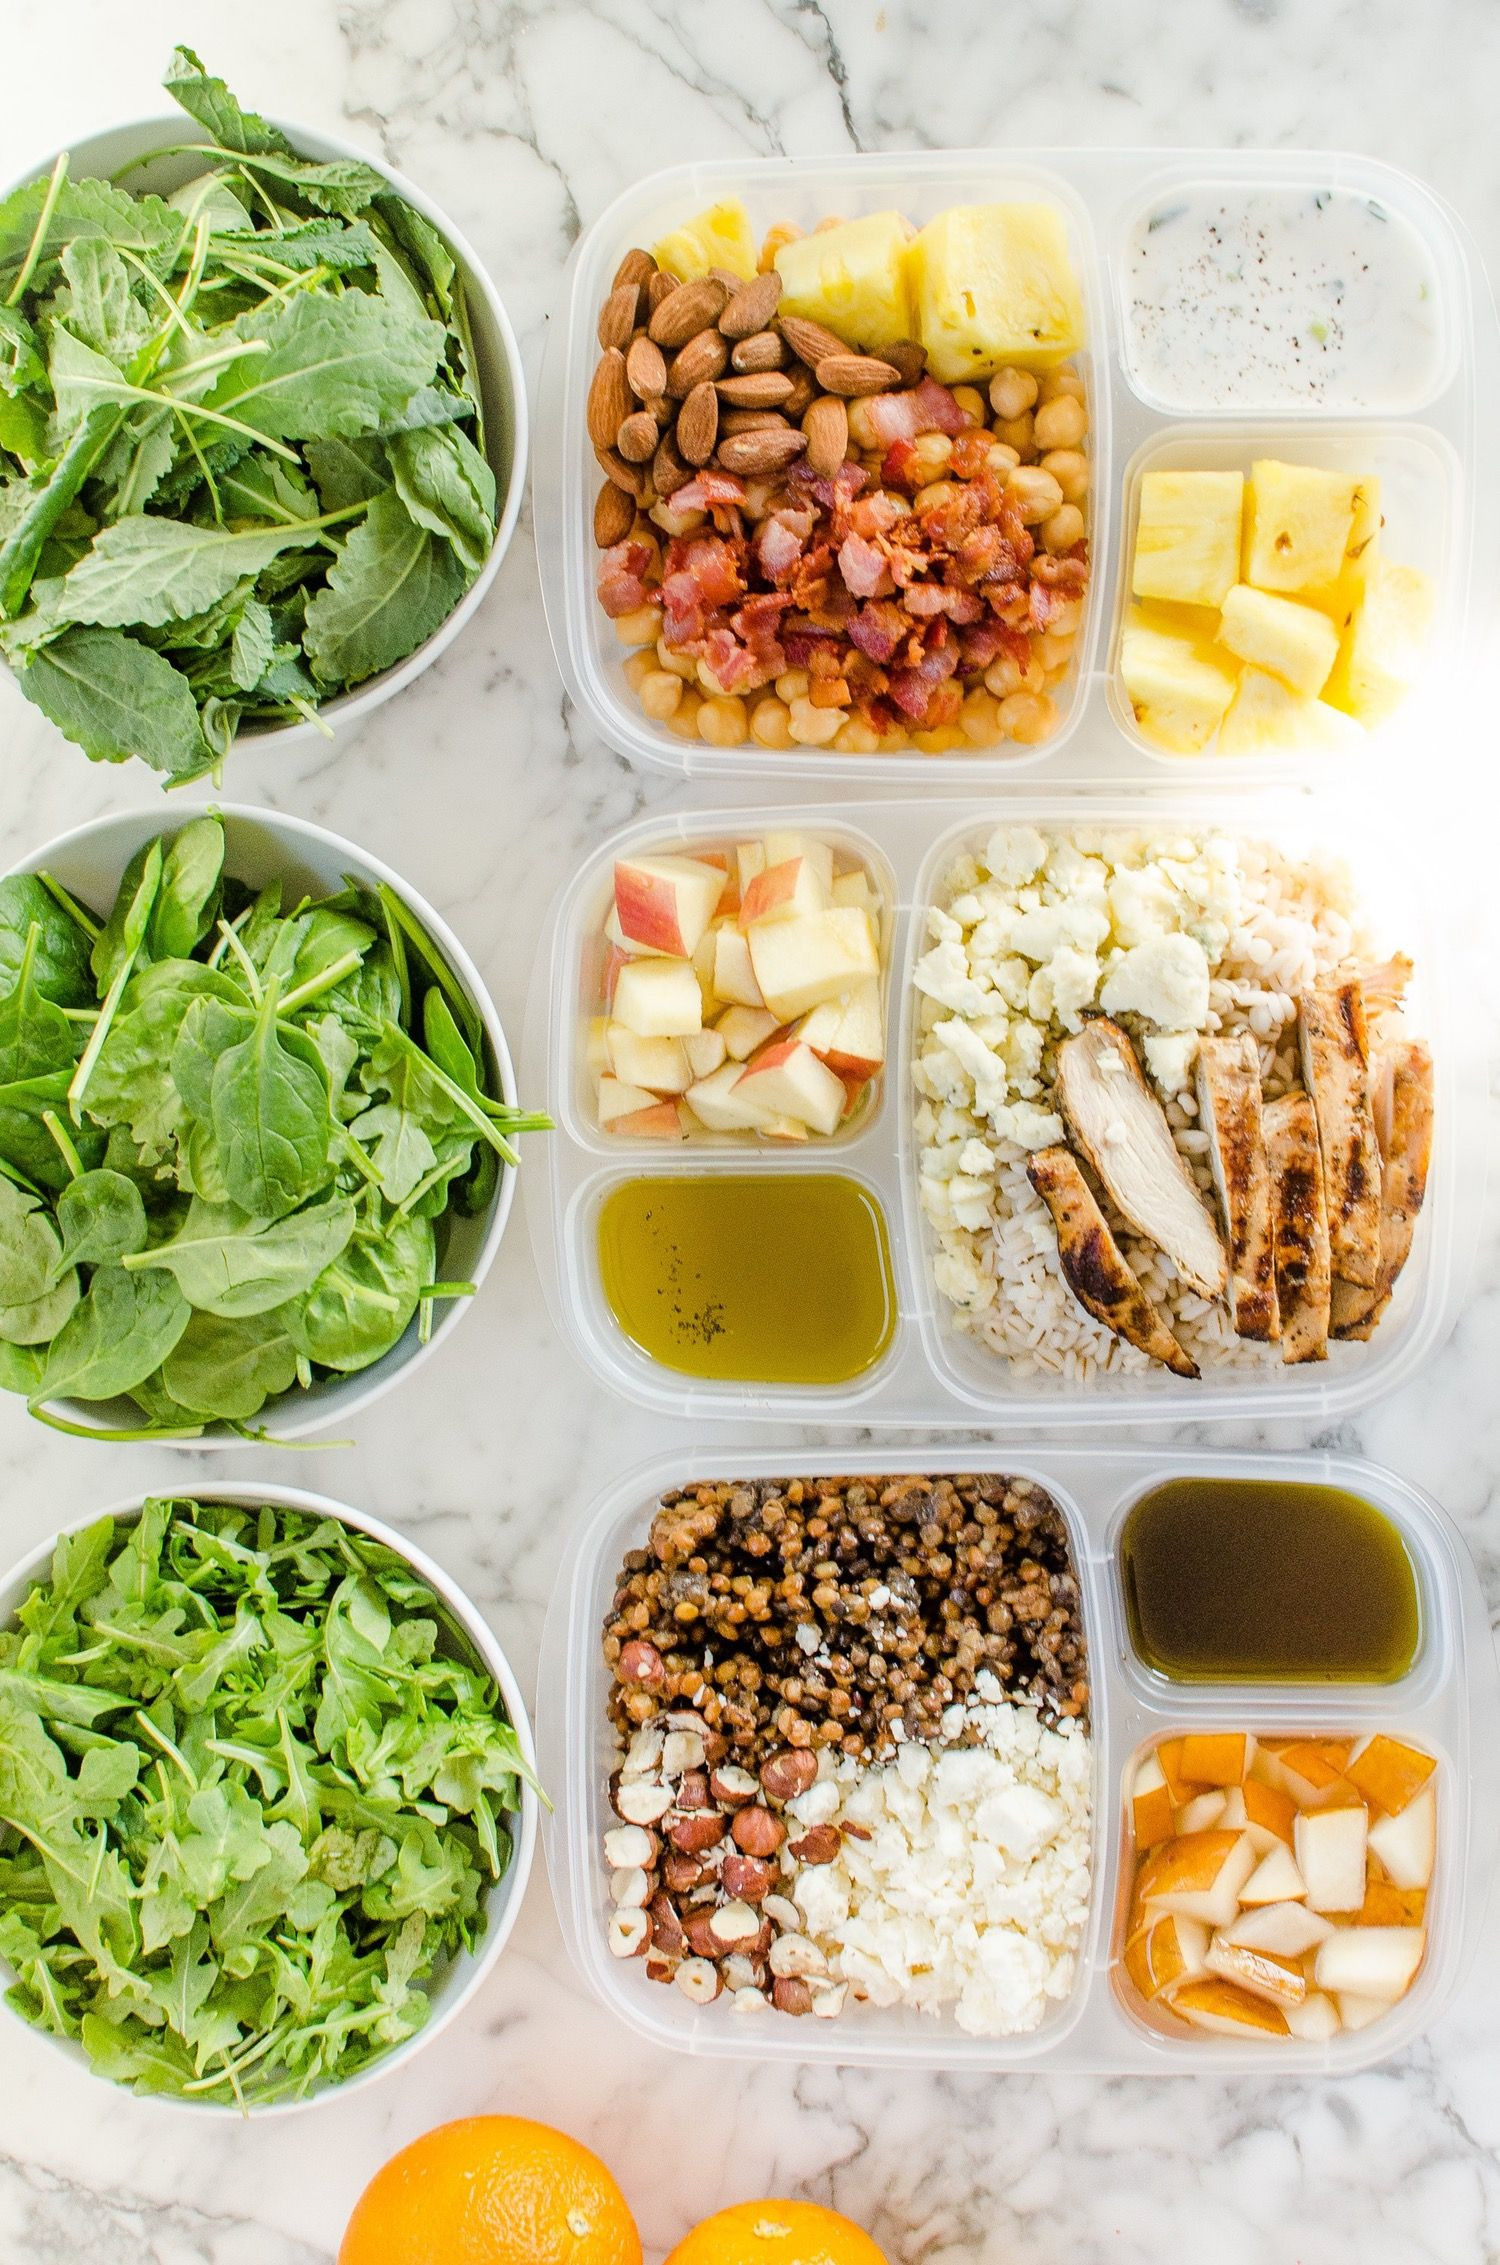 Healthy Make Ahead Lunches For Week
 20 Make Ahead Lunches to Get You Through the Work Week